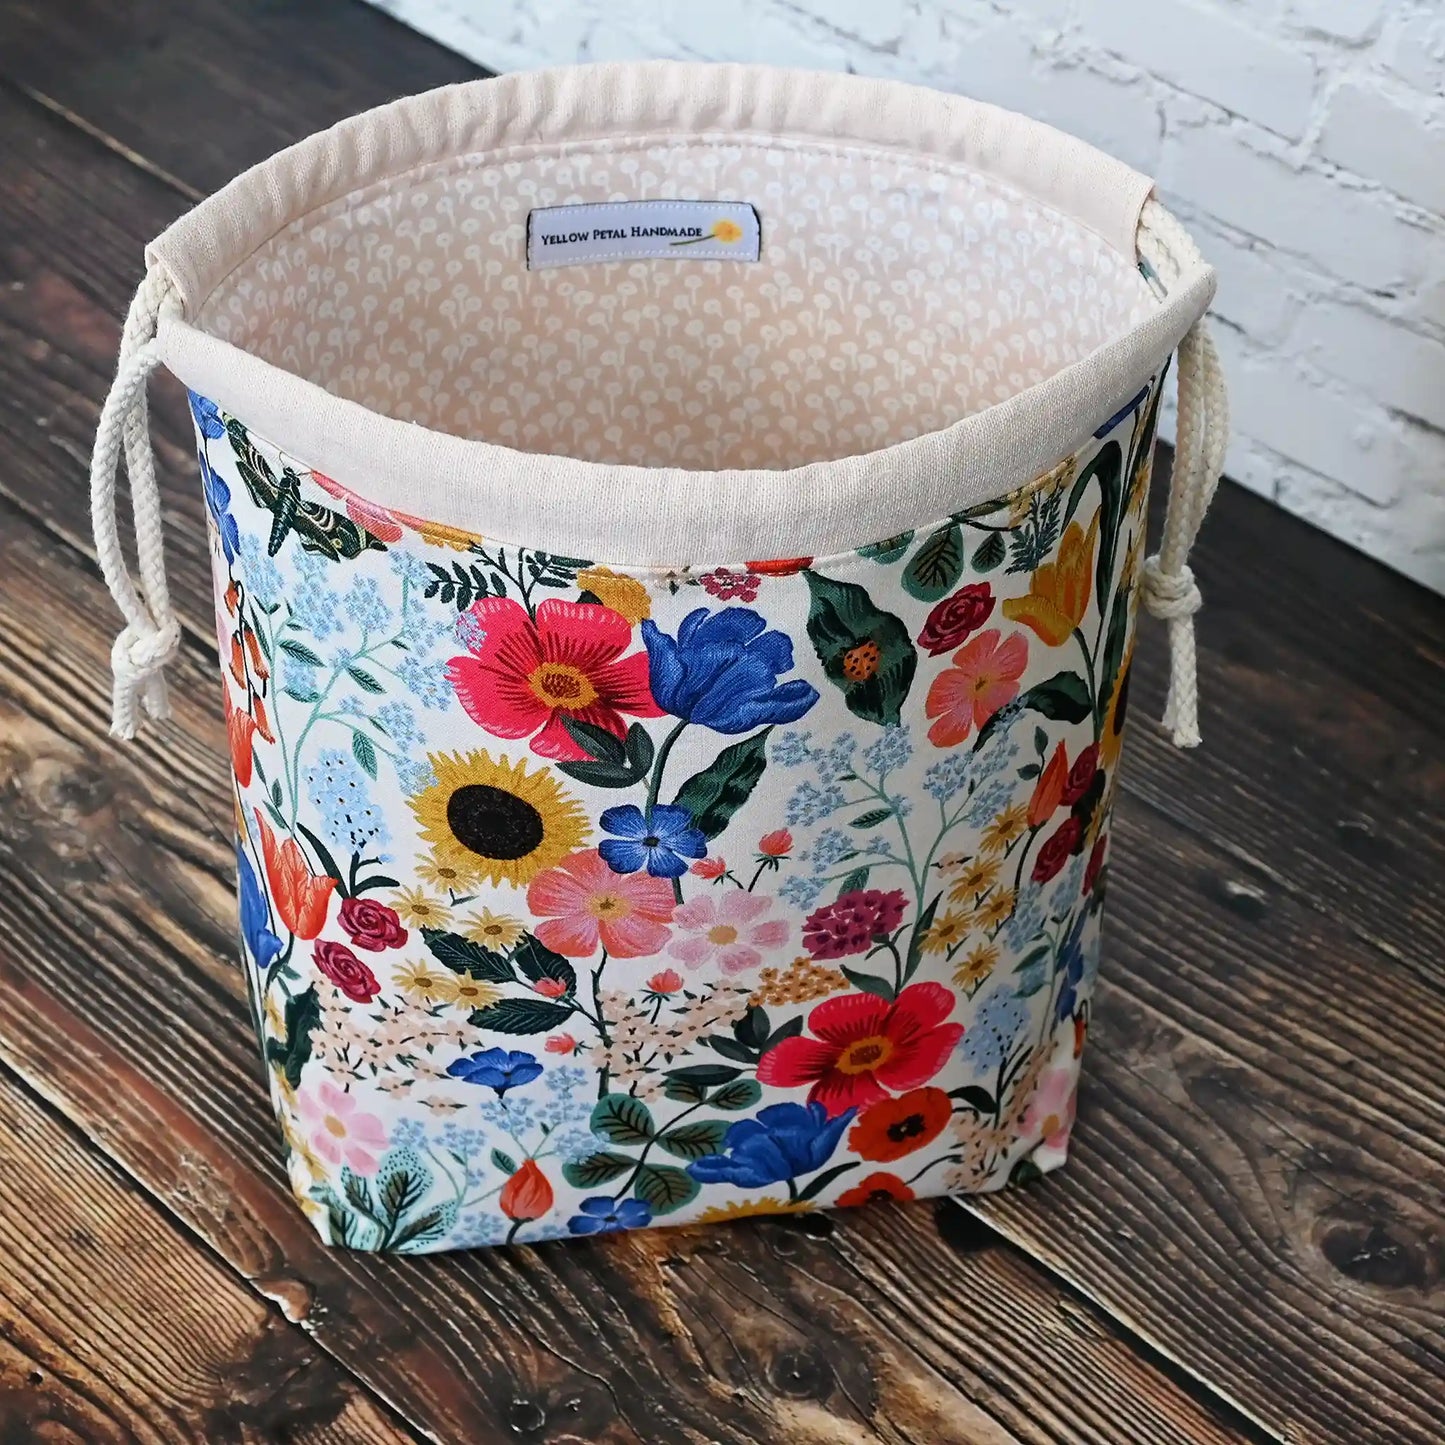 Pretty blush floral project bag with drawstring closure, made from the Curio collection by Rifle Paper Co.  Made in Nova Scotia, Canada by Yellow Petal Handmade.